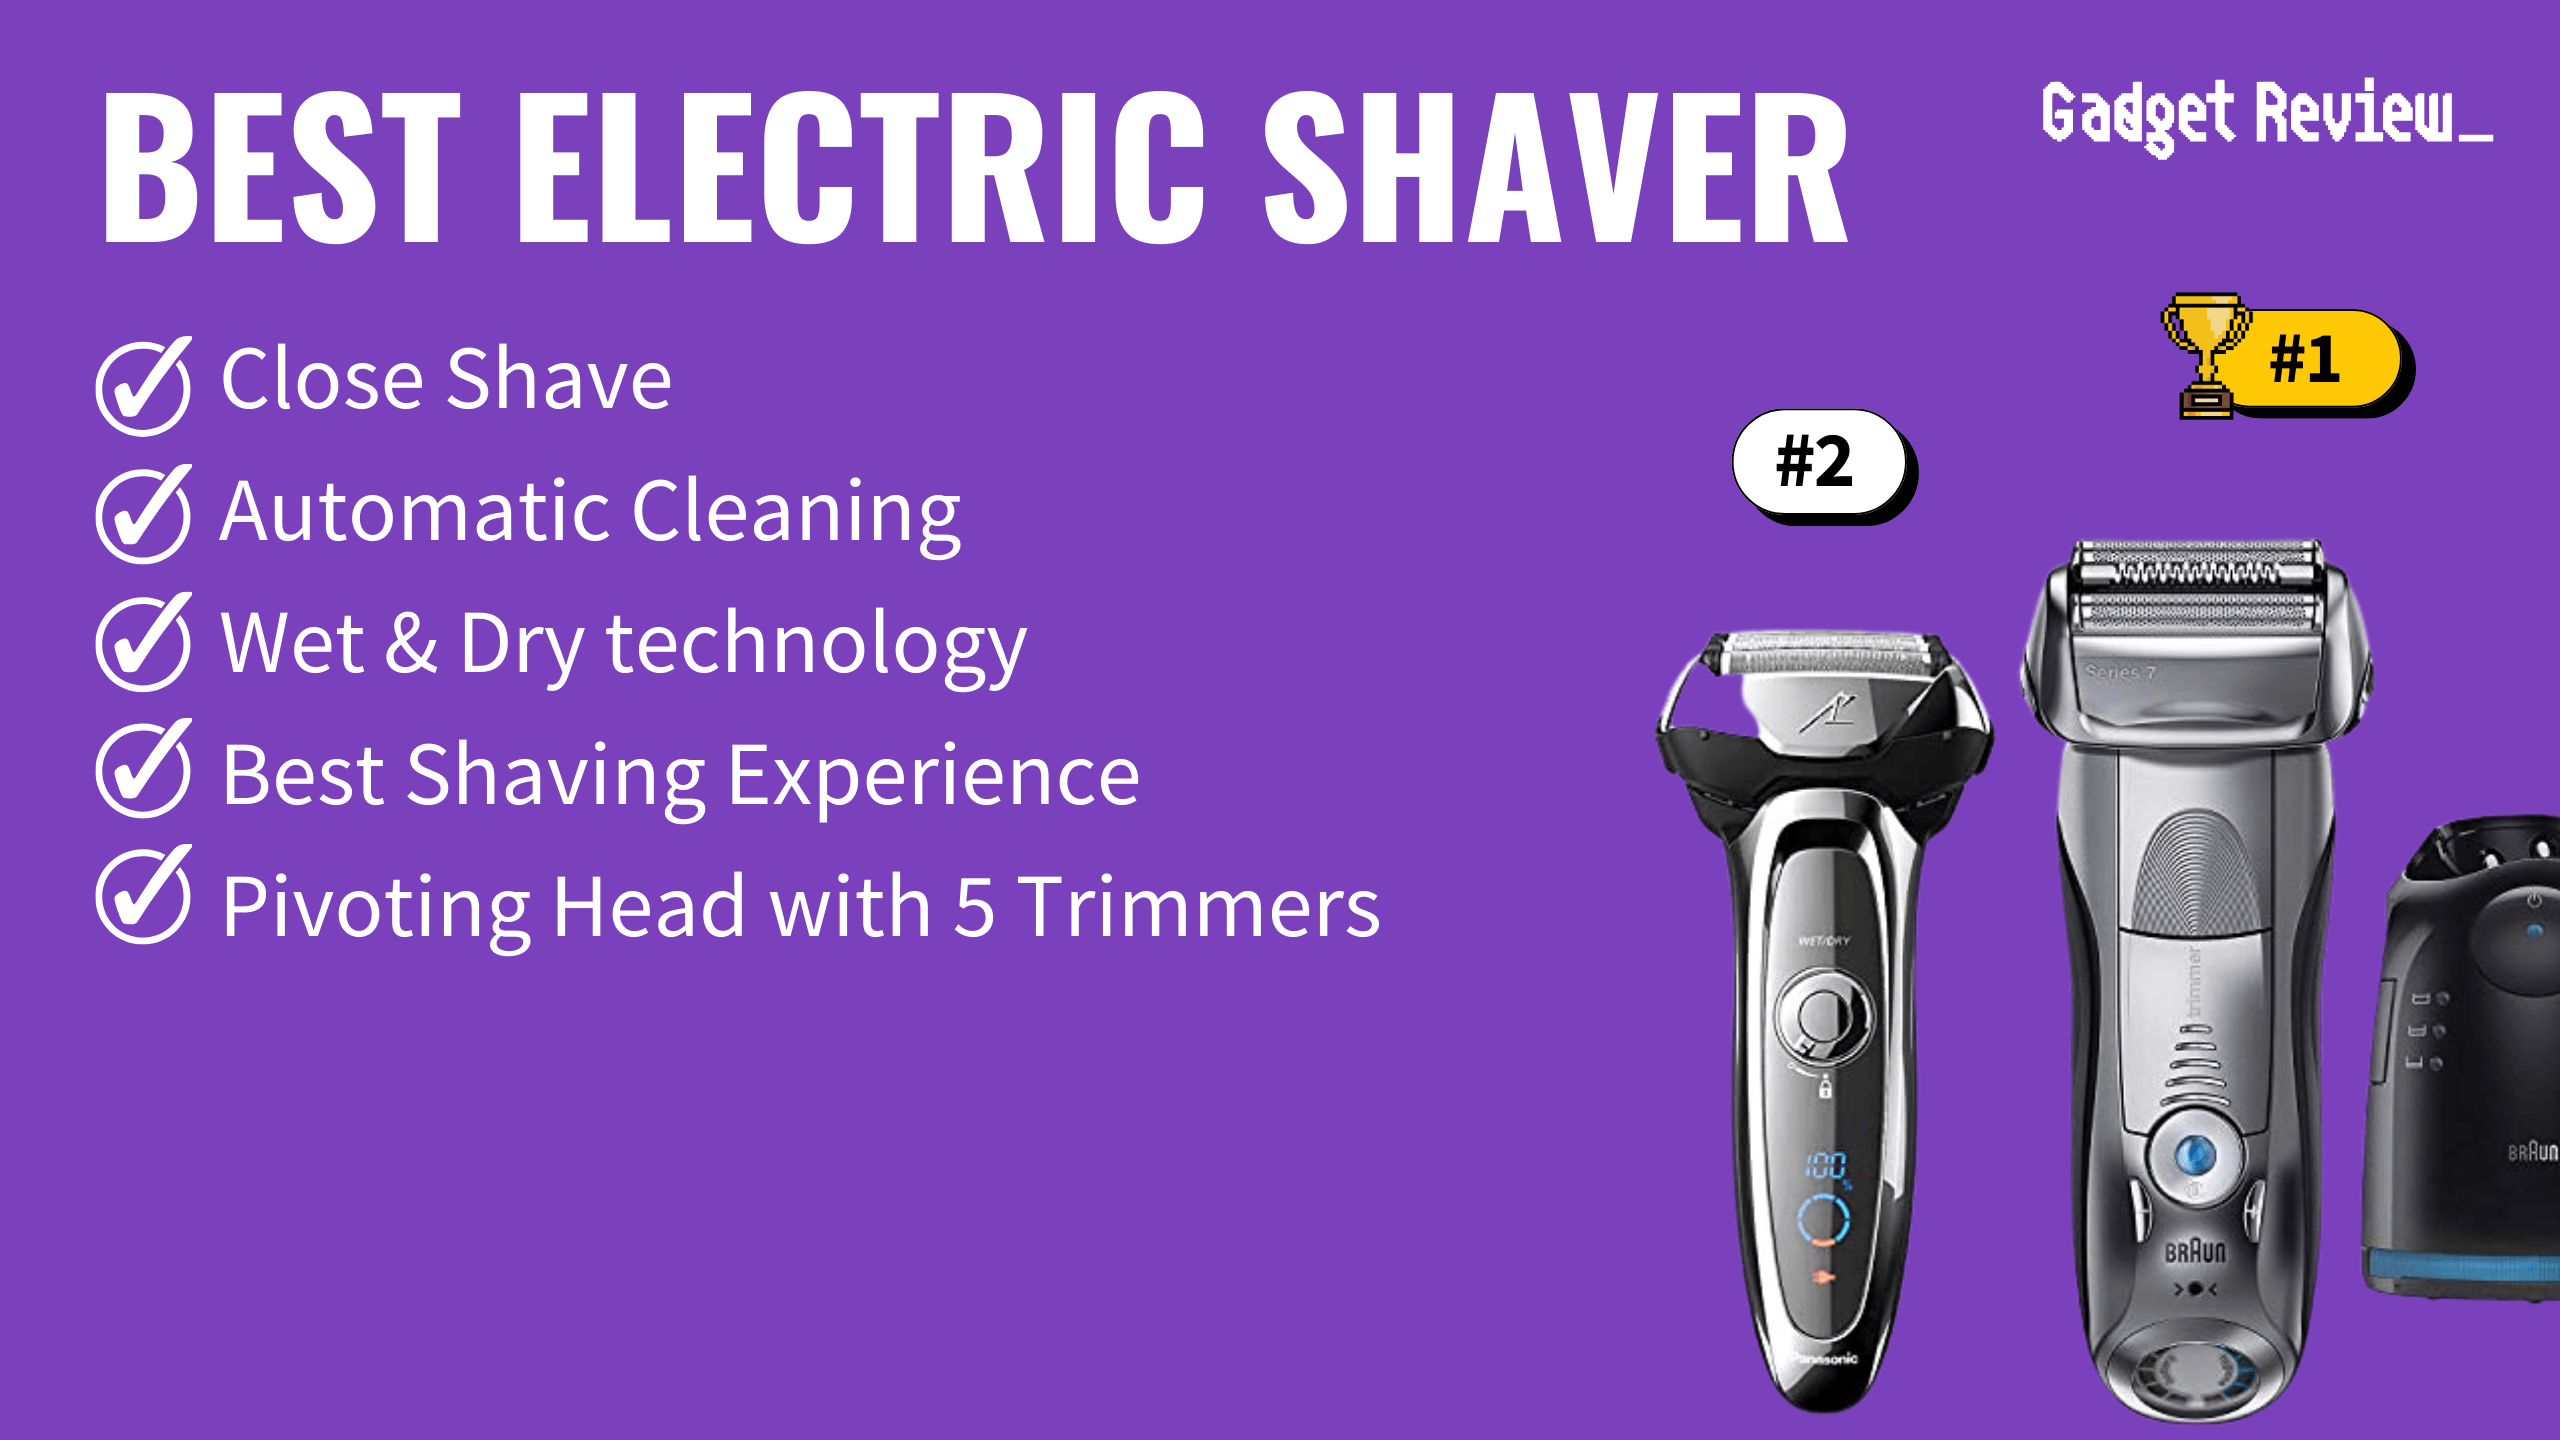 best electric shaver featured image that shows the top three best bathroom essential models